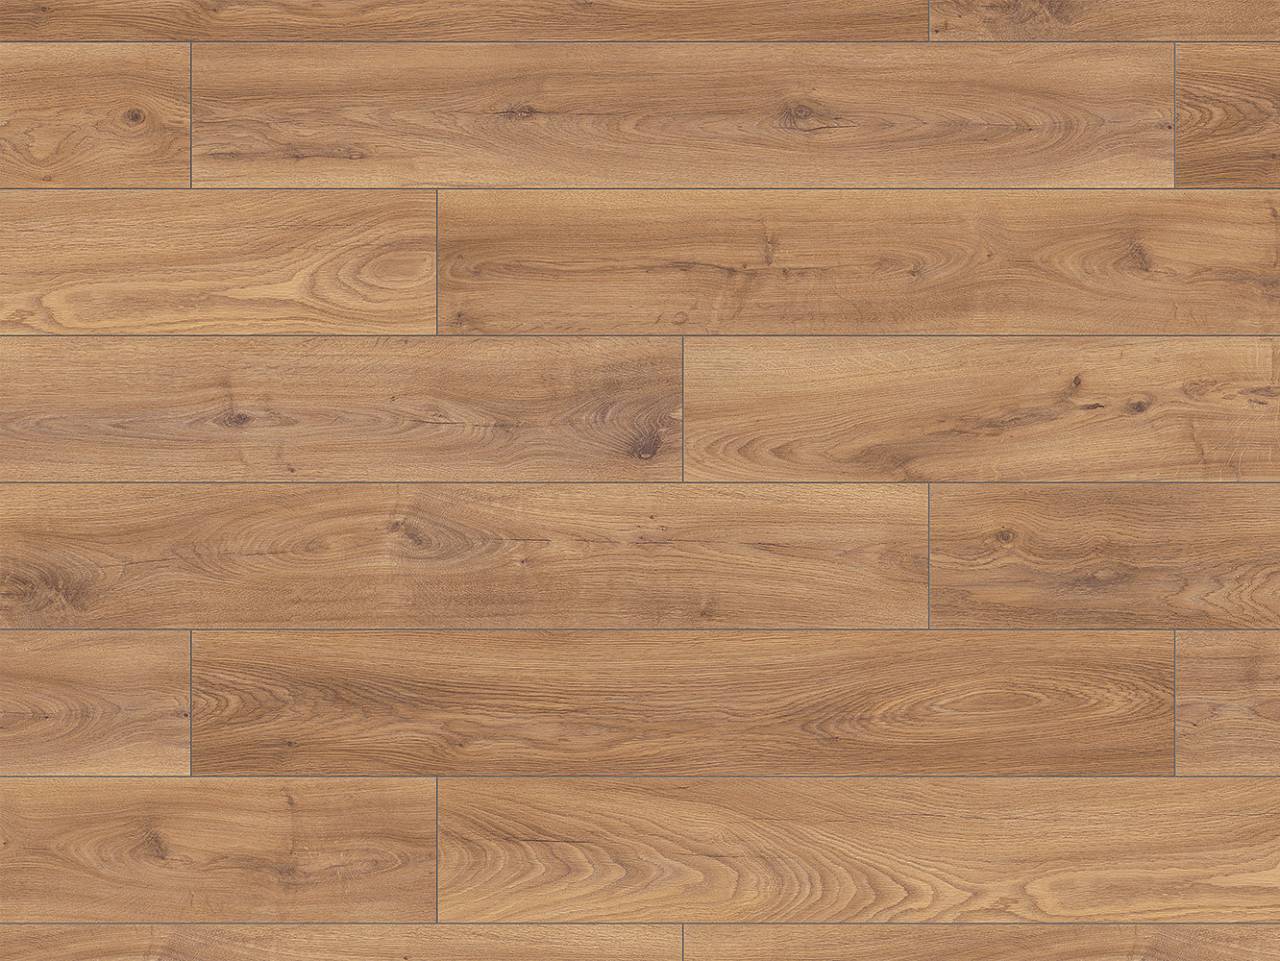 Firebrand Oak is the exceptional expression of wood - loudly stated, with destingished woood grain.